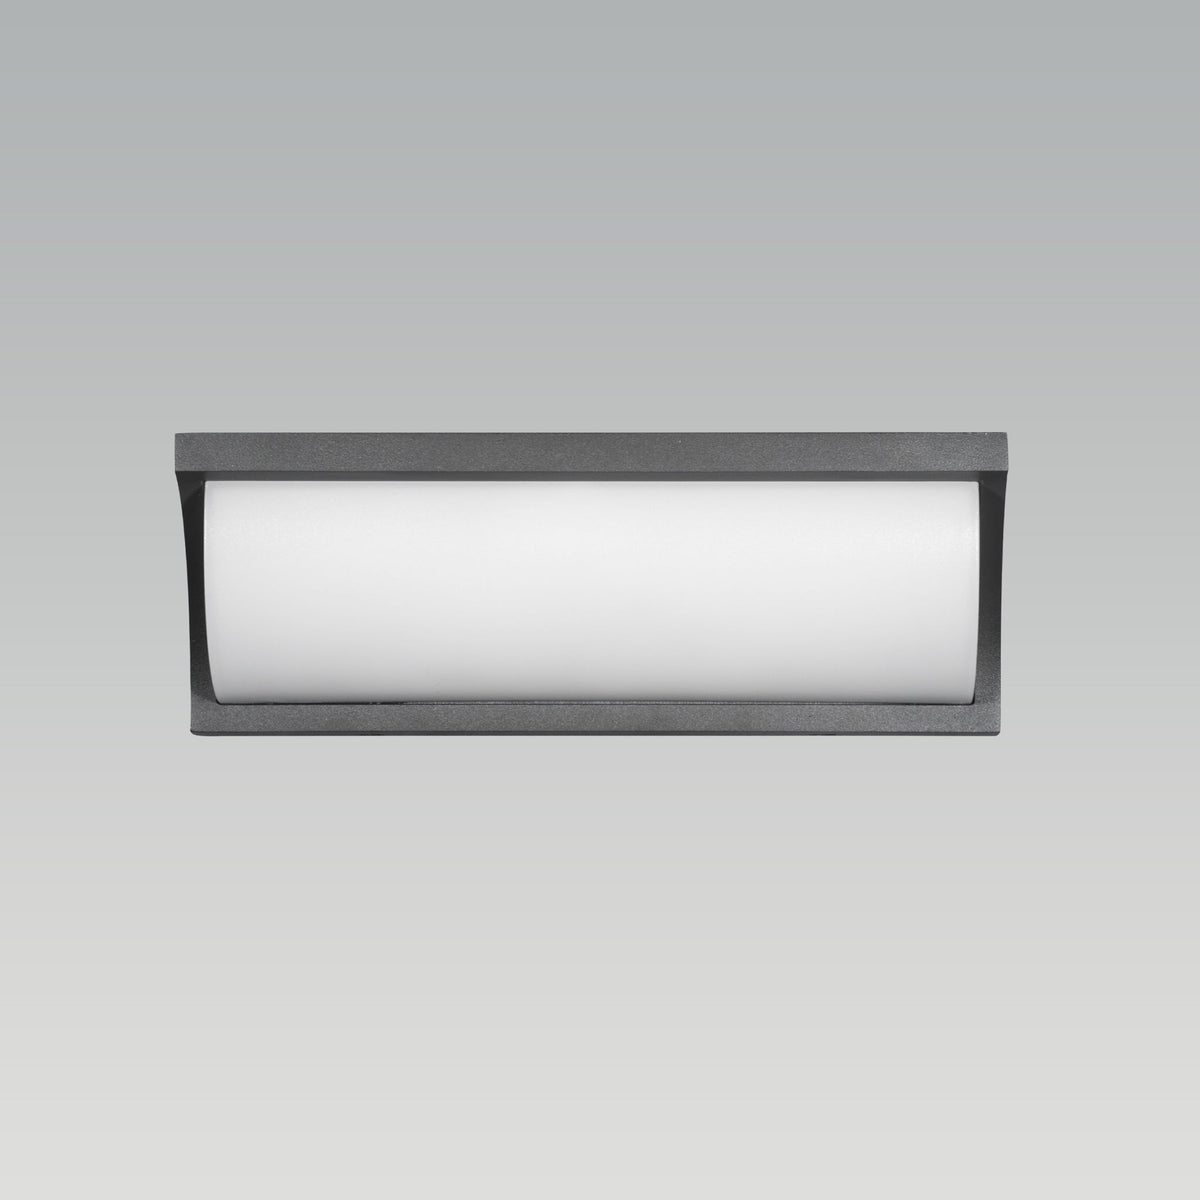 Forward Looking LED Outdoor Wall Light online